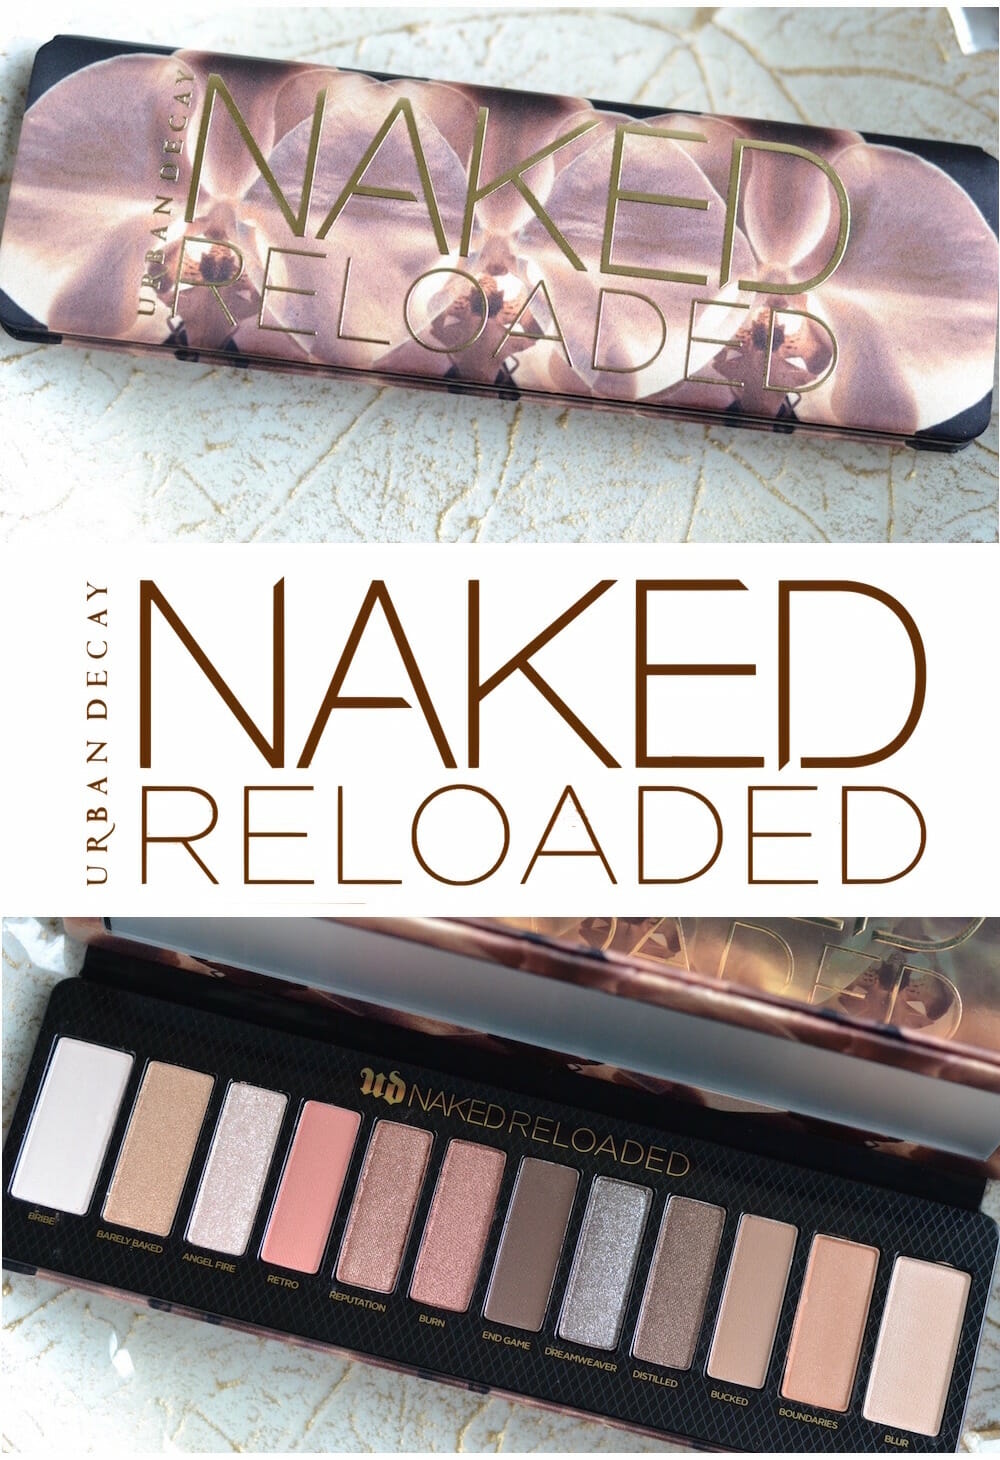 Urban Decay Naked Reloaded Palette swatches and review #UrbanDecay #NAKEDReloaded